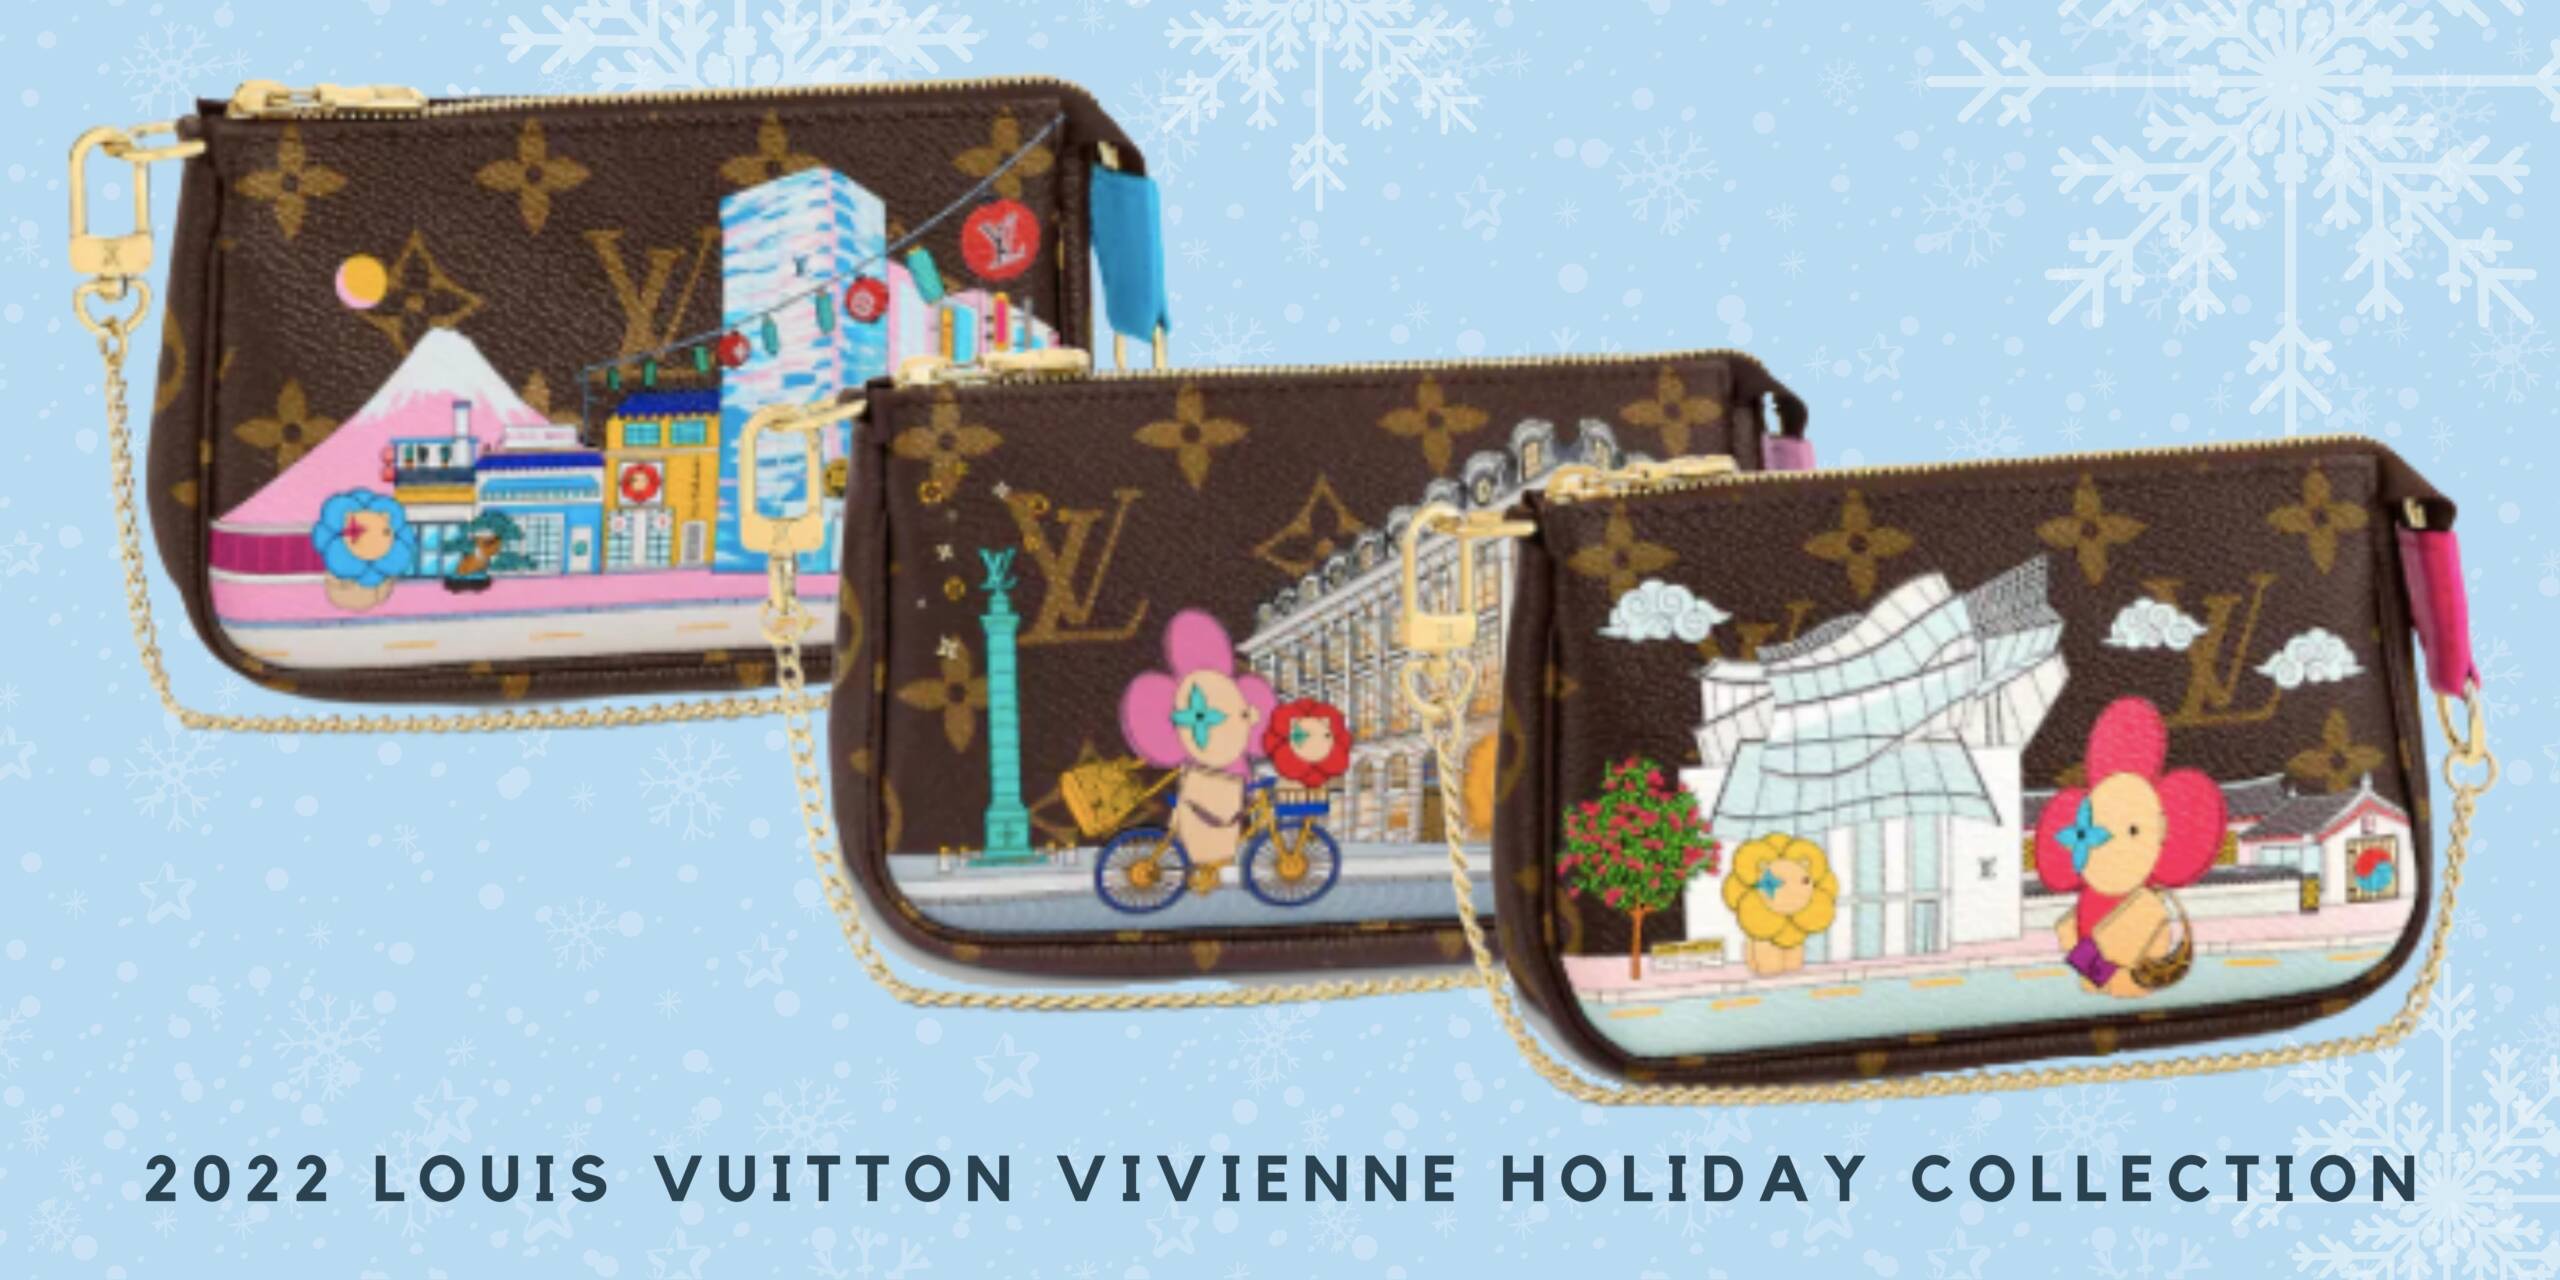 LOUIS VUITTON VIVIENNE HOLIDAY COLLECTION